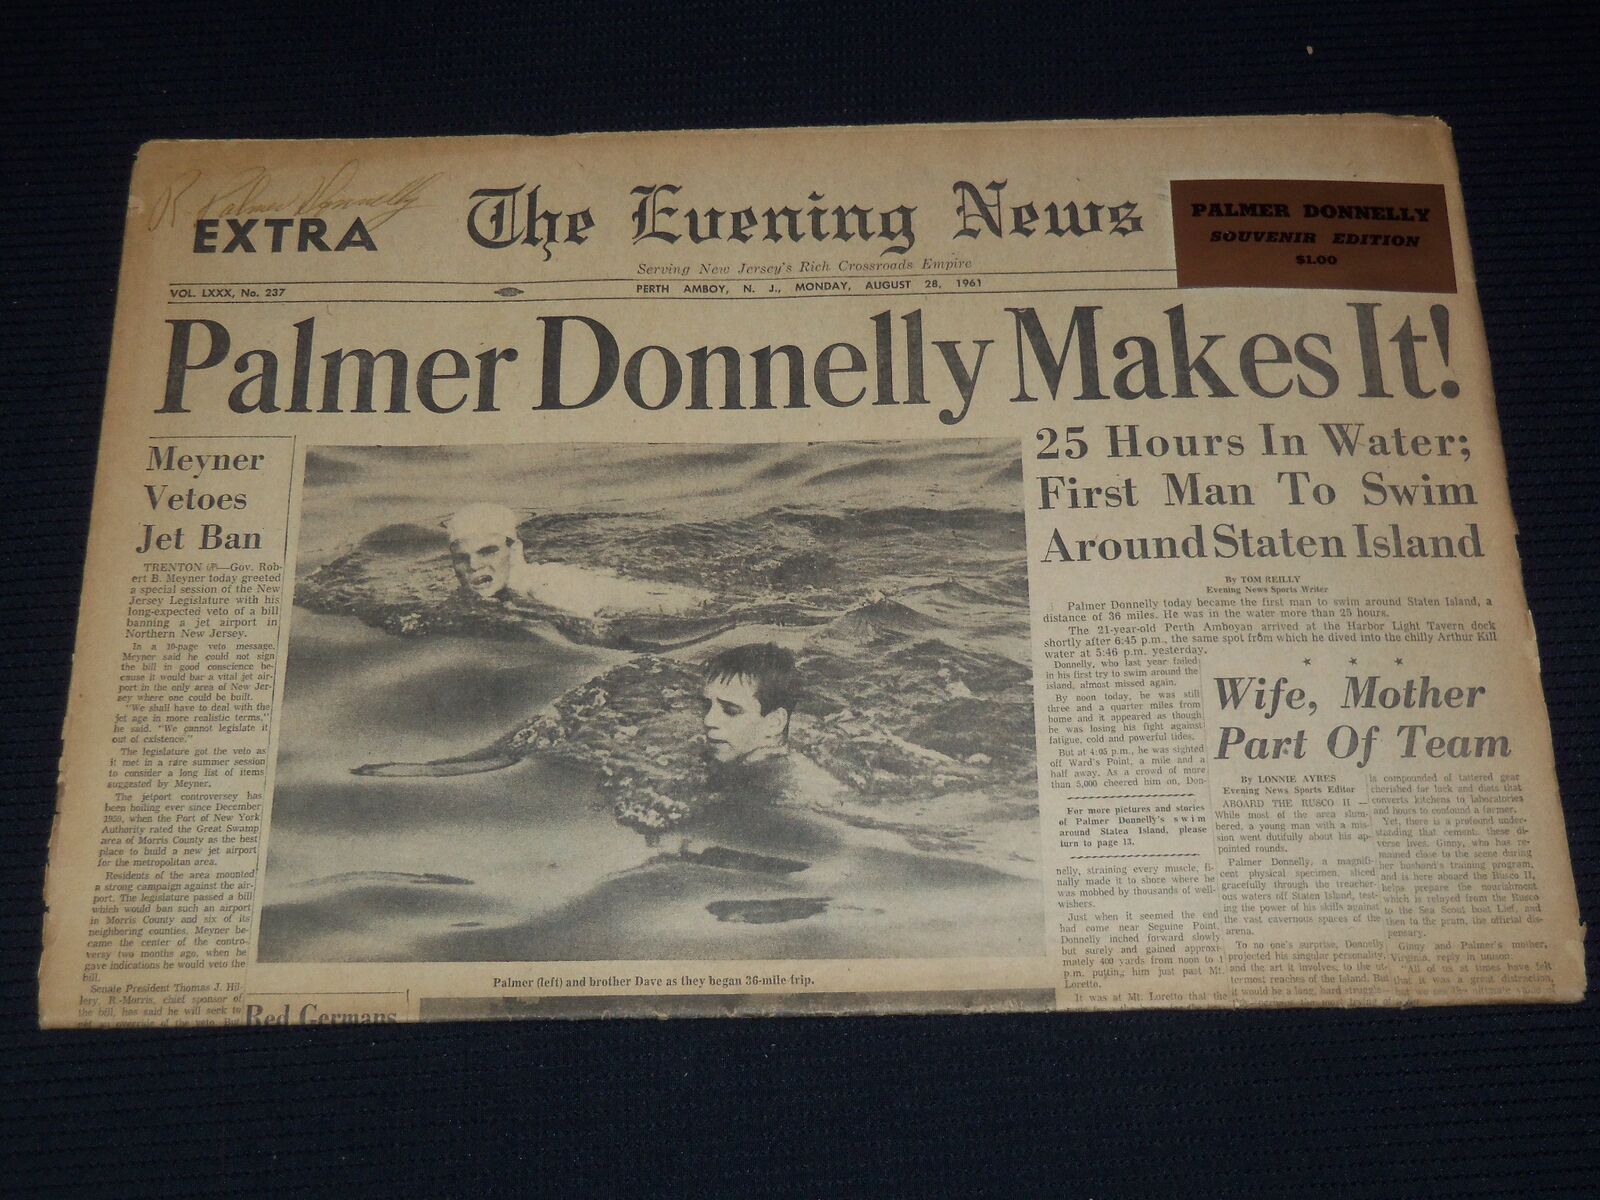 1961 AUGUST 28 EVENING NEWS NEWSPAPER - PALMER DONNELLY MAKES IT - NP 2151U